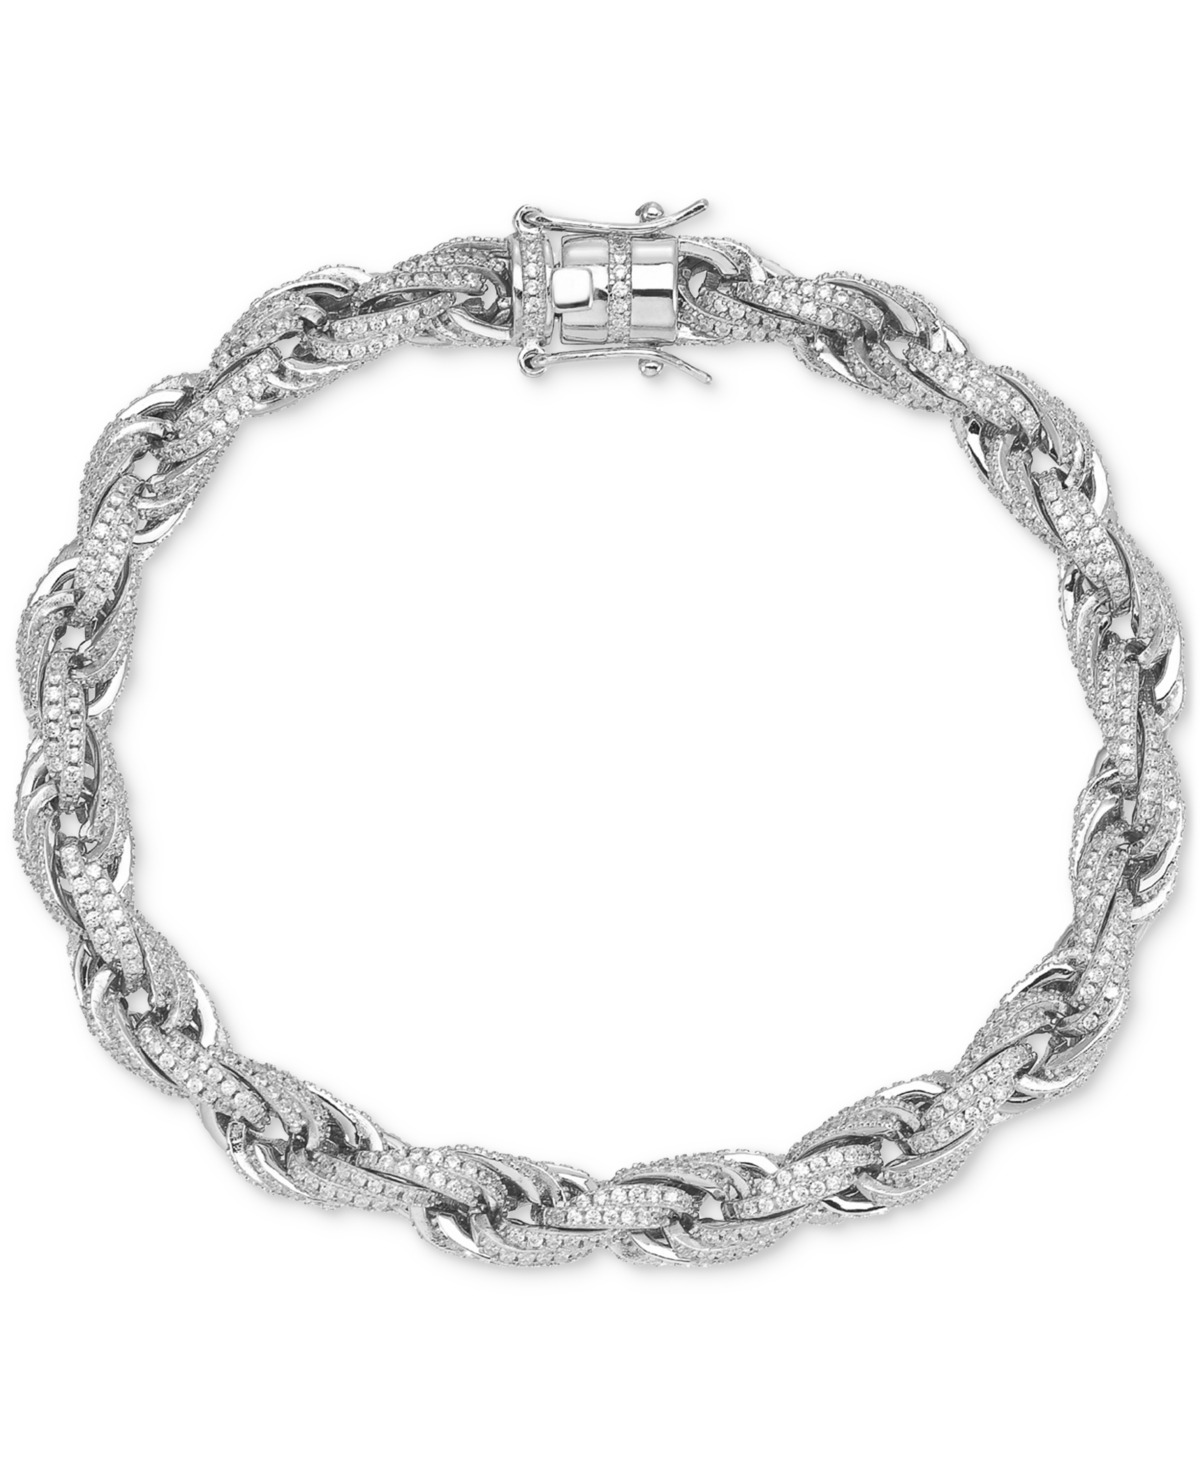 Men's Cubic Zirconia Rope Link Bracelet in Sterling Silver, Created for Macy's - Silver